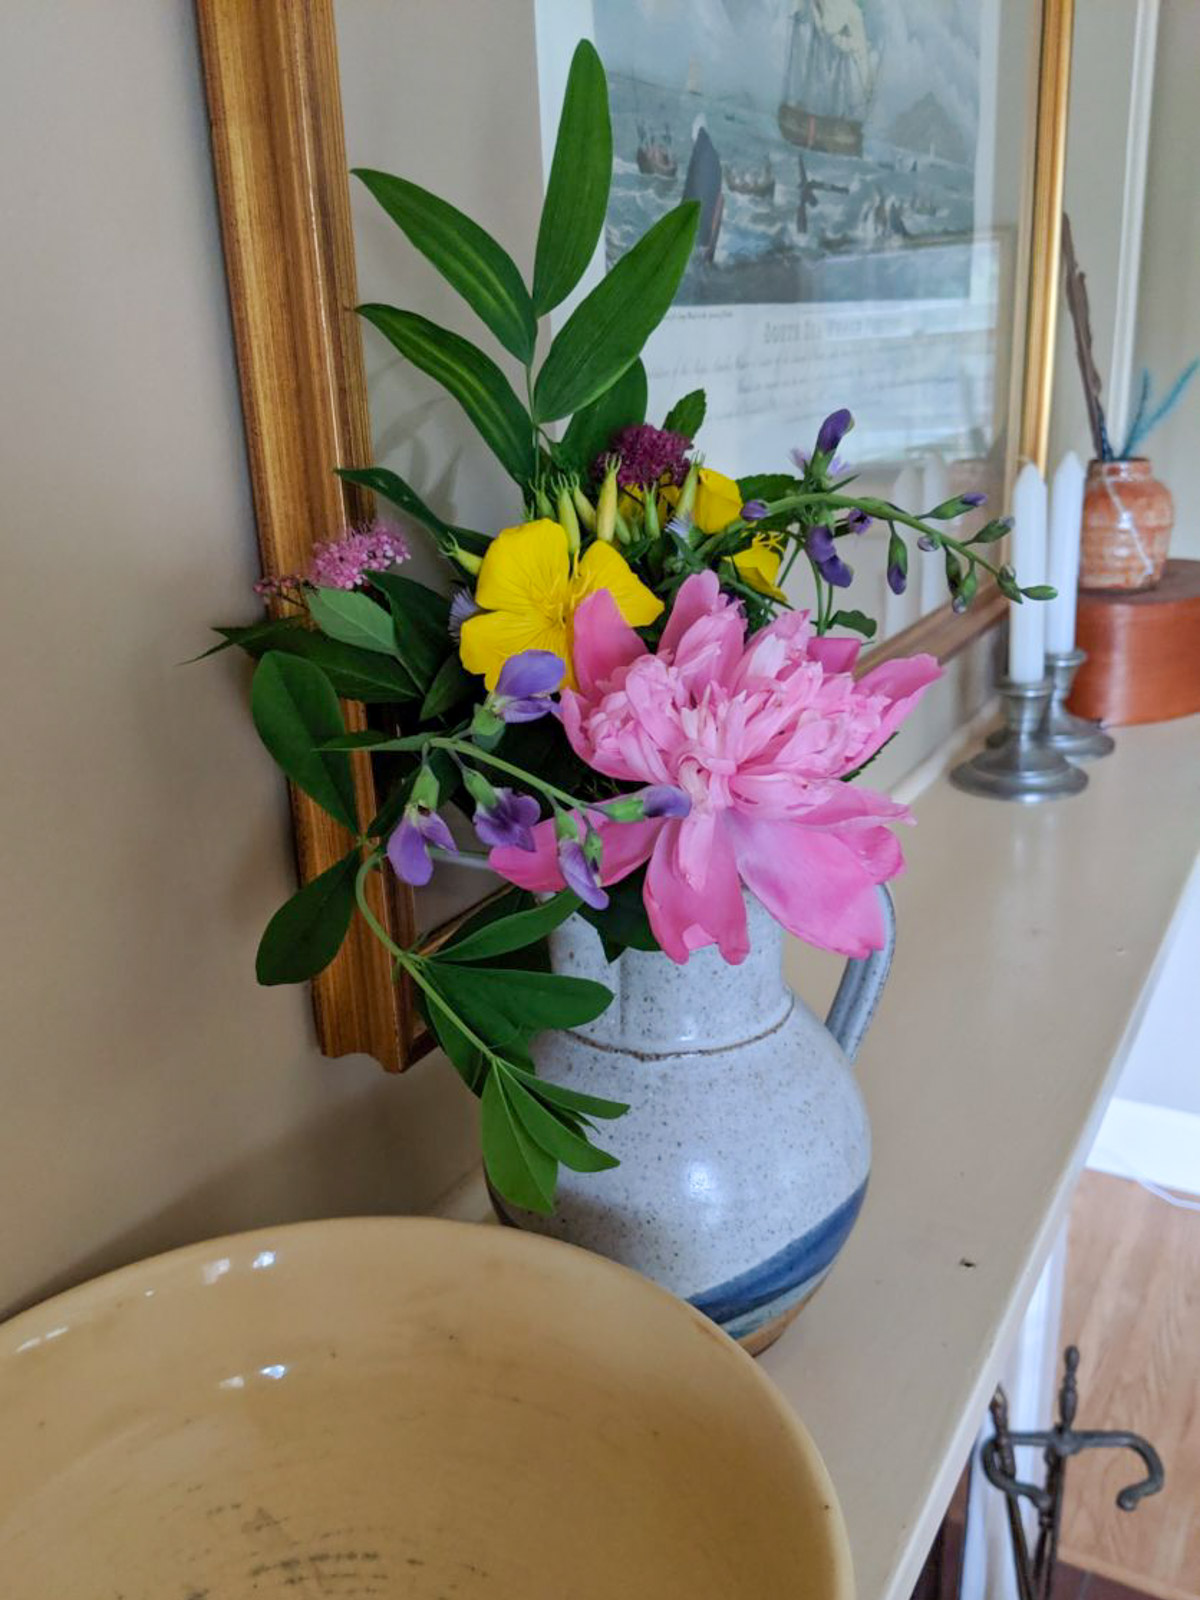 A bouquet of fresh cut flowers from the garden in a vase.